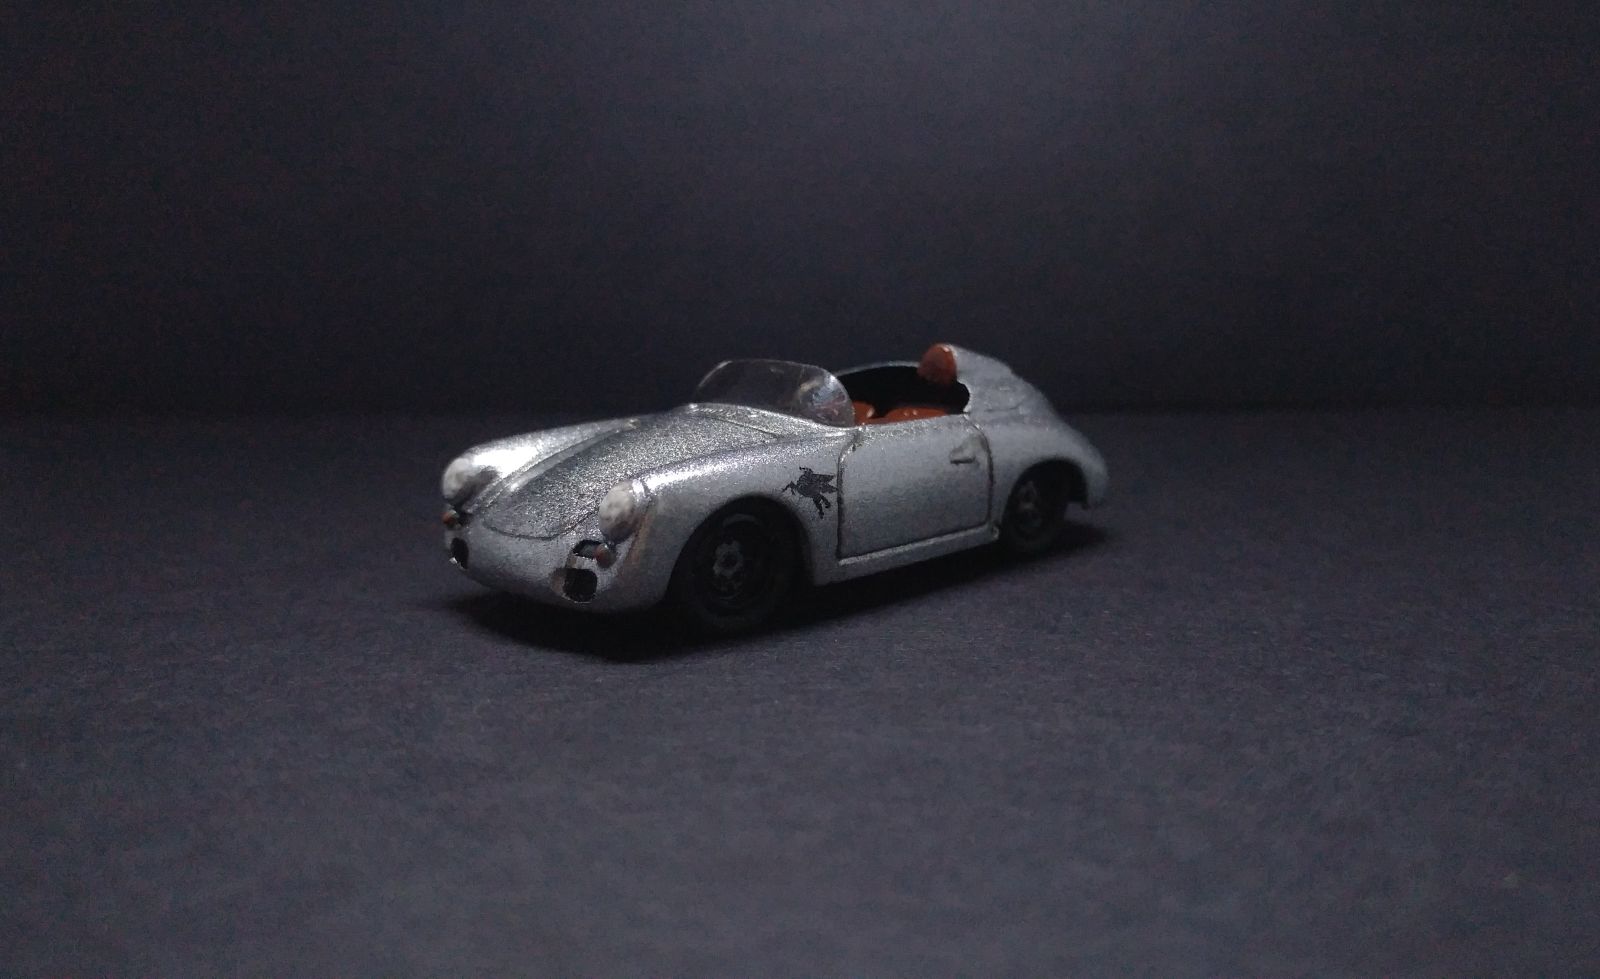 Illustration for article titled Teutonic Friday? Impatient Small Silver Speedster